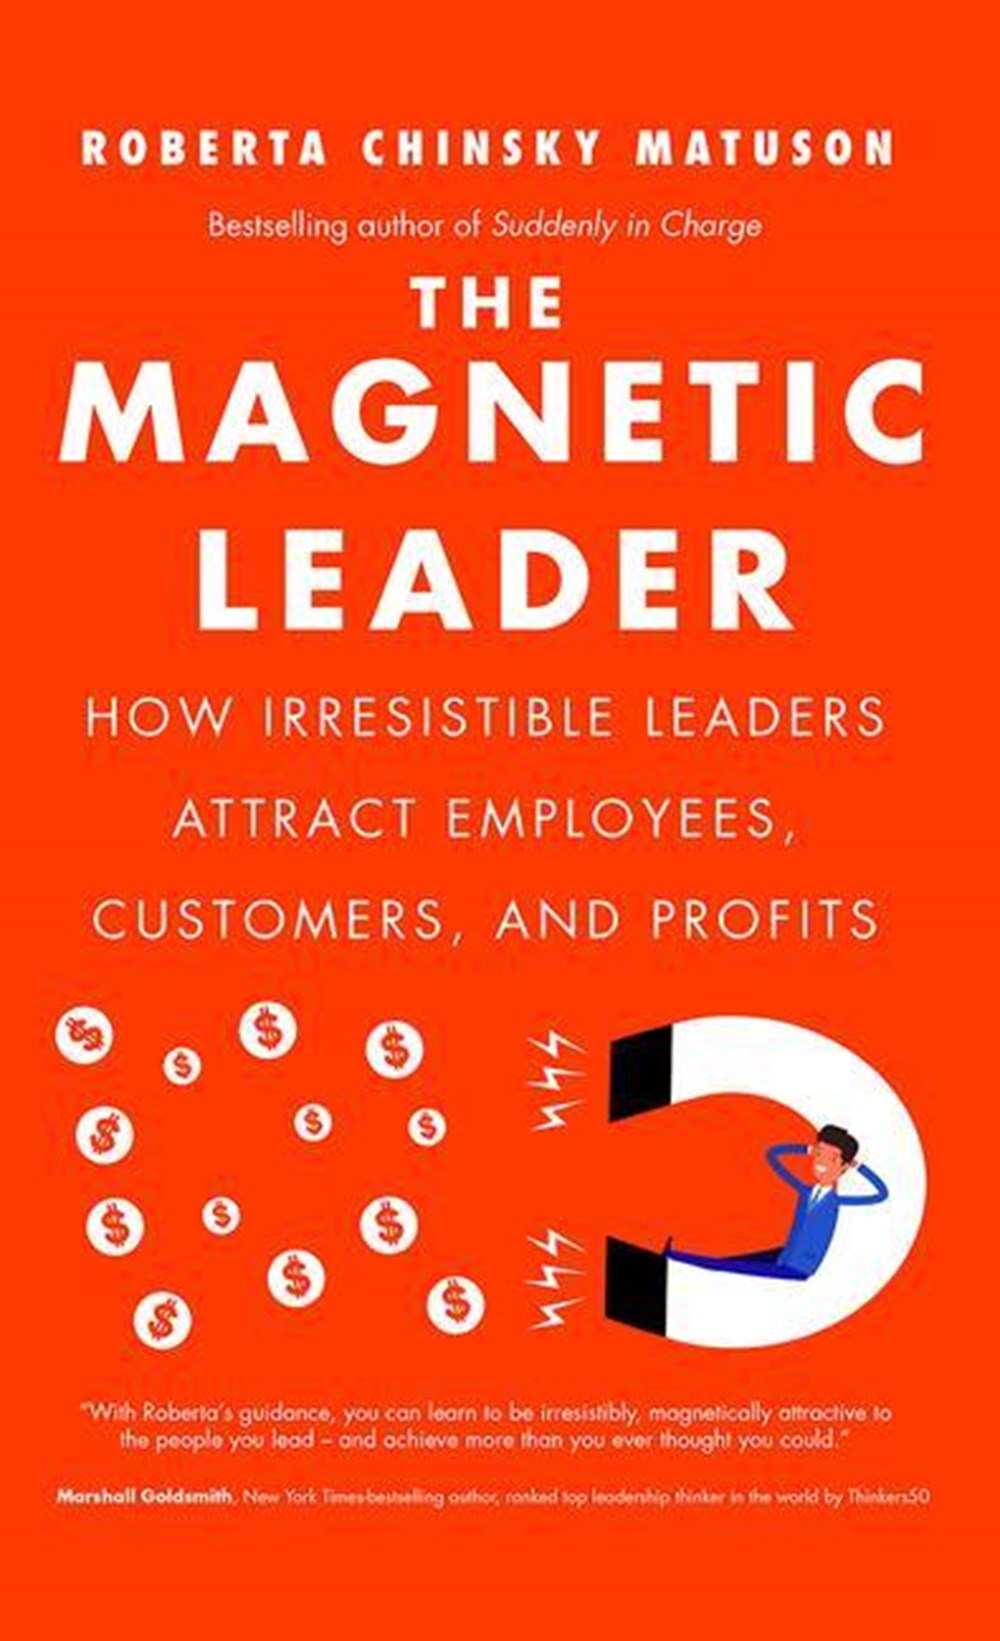 Magnetic Leader How Irresistible Leaders Attract Employees, Customers, and Profits